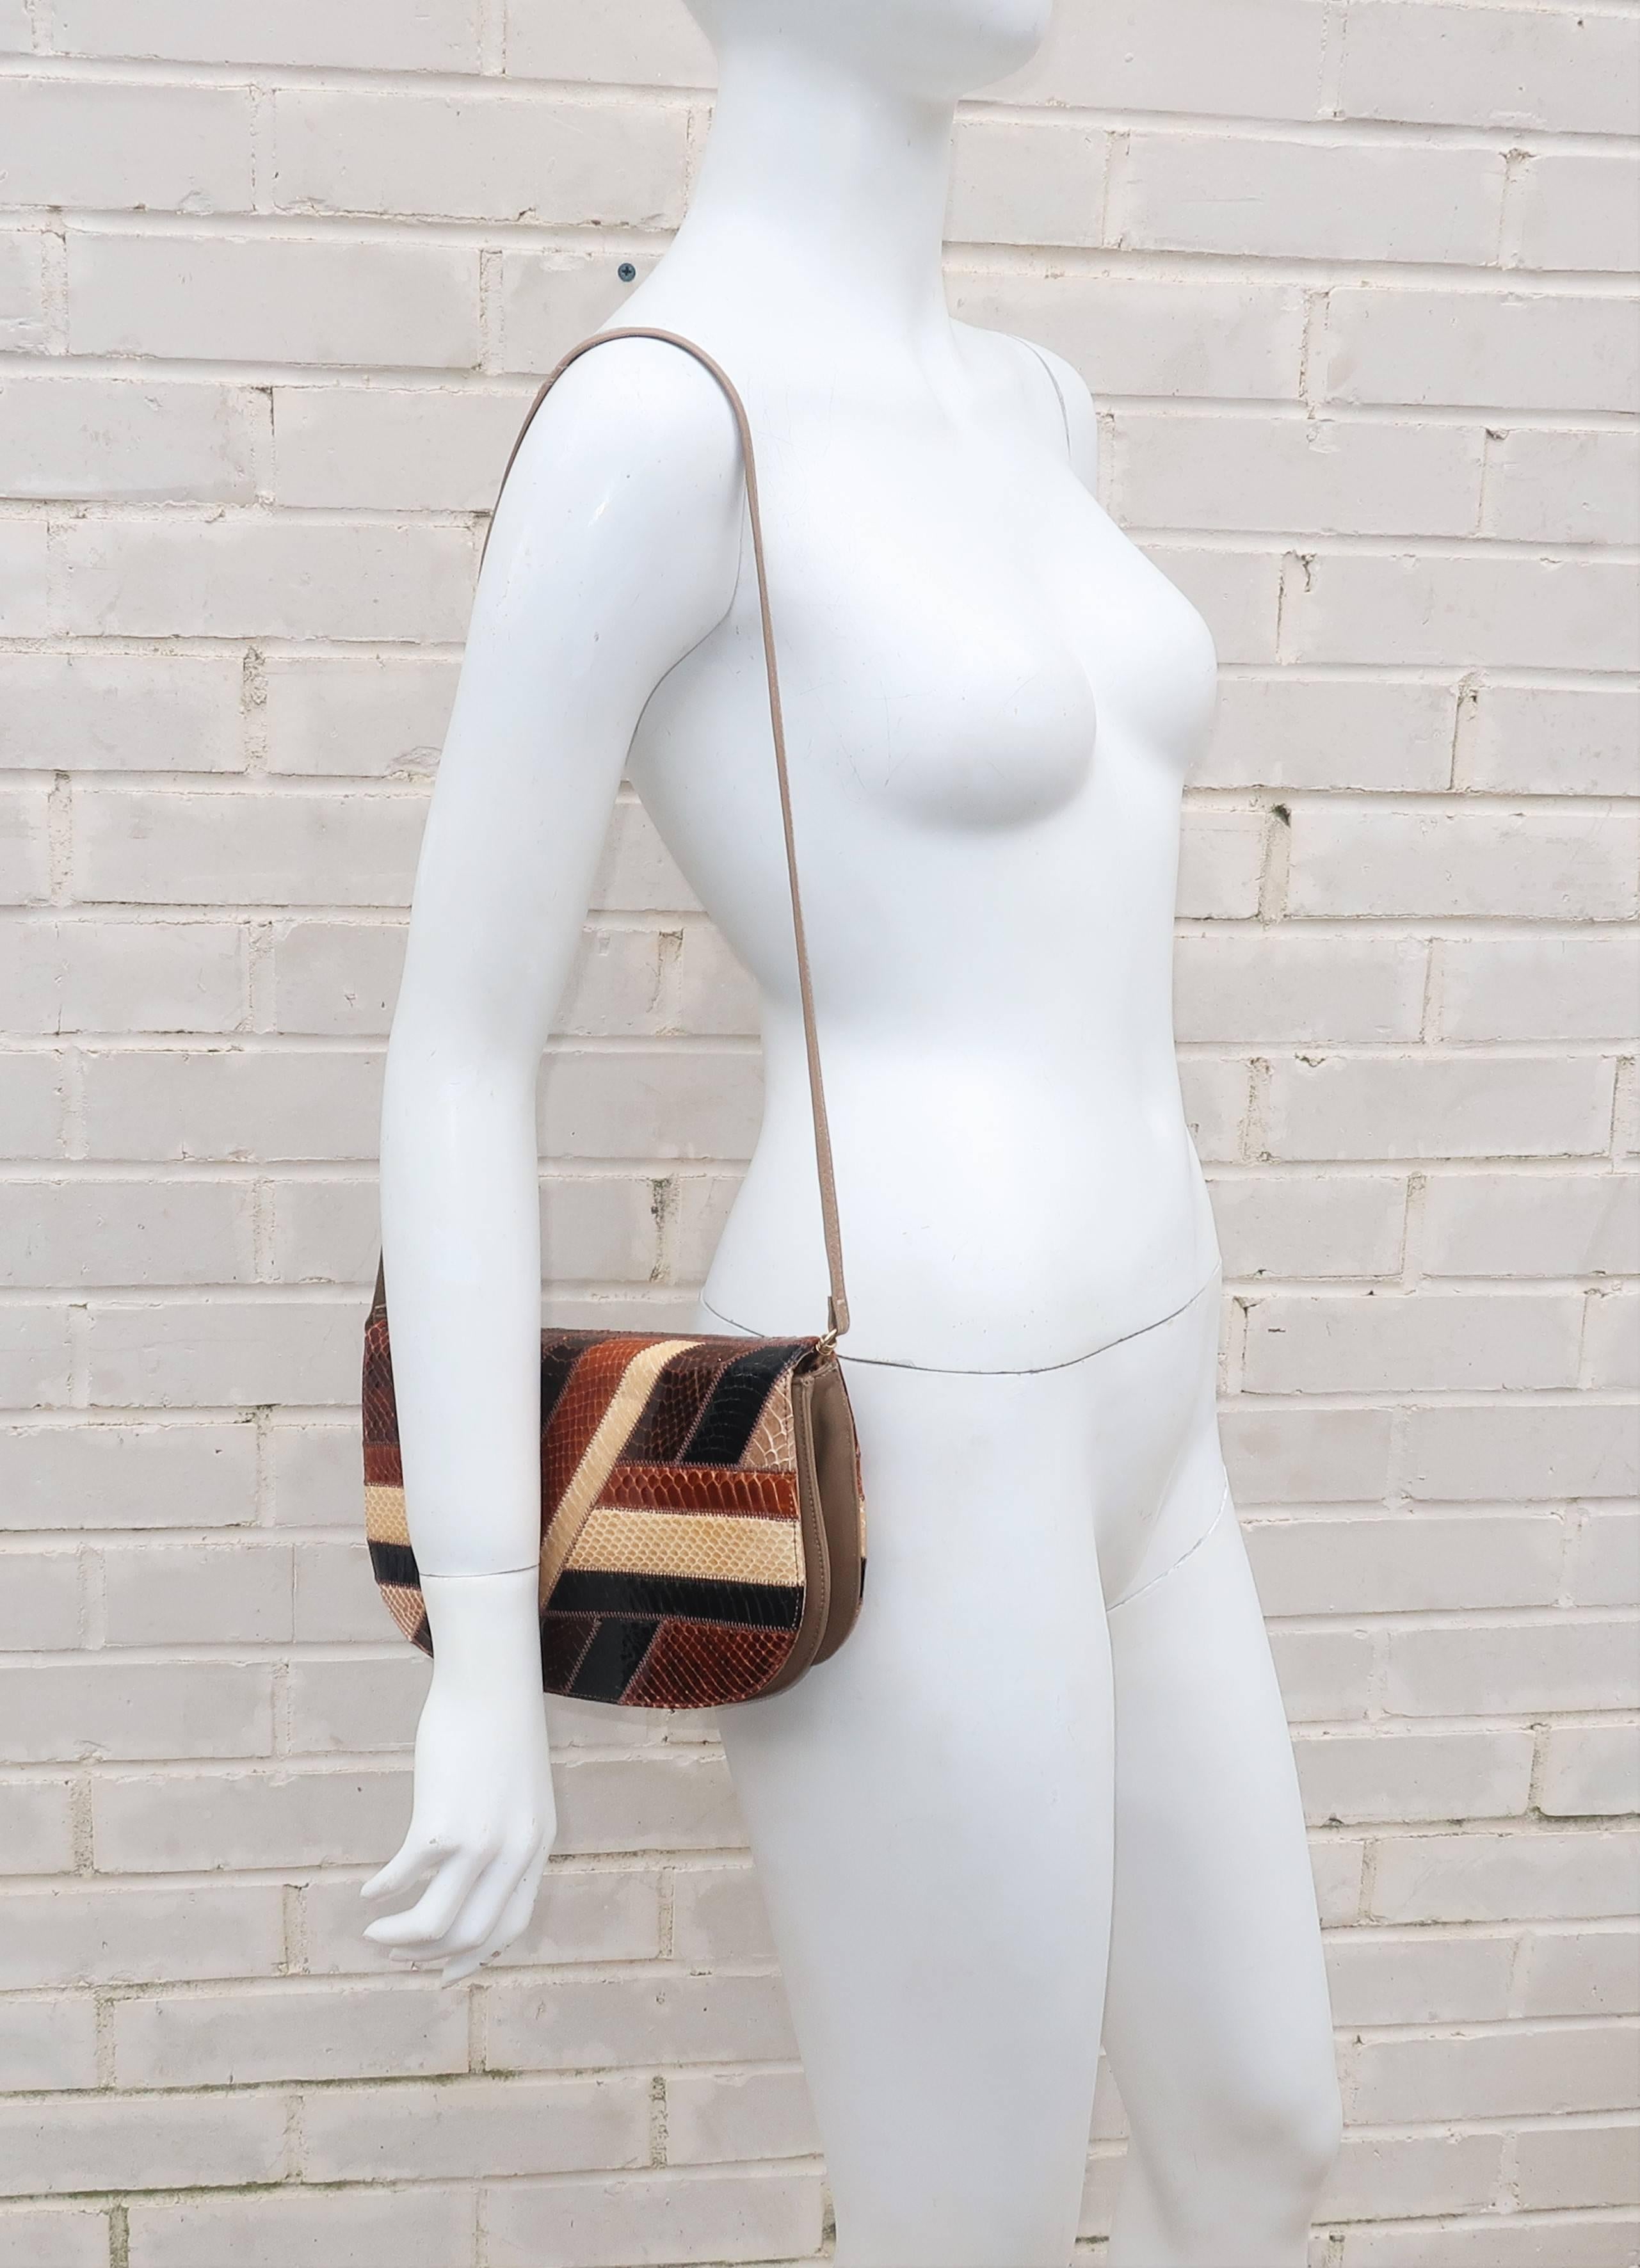 Patchwork perfection!  This 1970’s Palizzio handbag is created with various shades of brown snakeskin in an art deco revival patchwork design at the front and back.  The gusset and shoulder strap are a high quality taupe faux leather.  The strap is